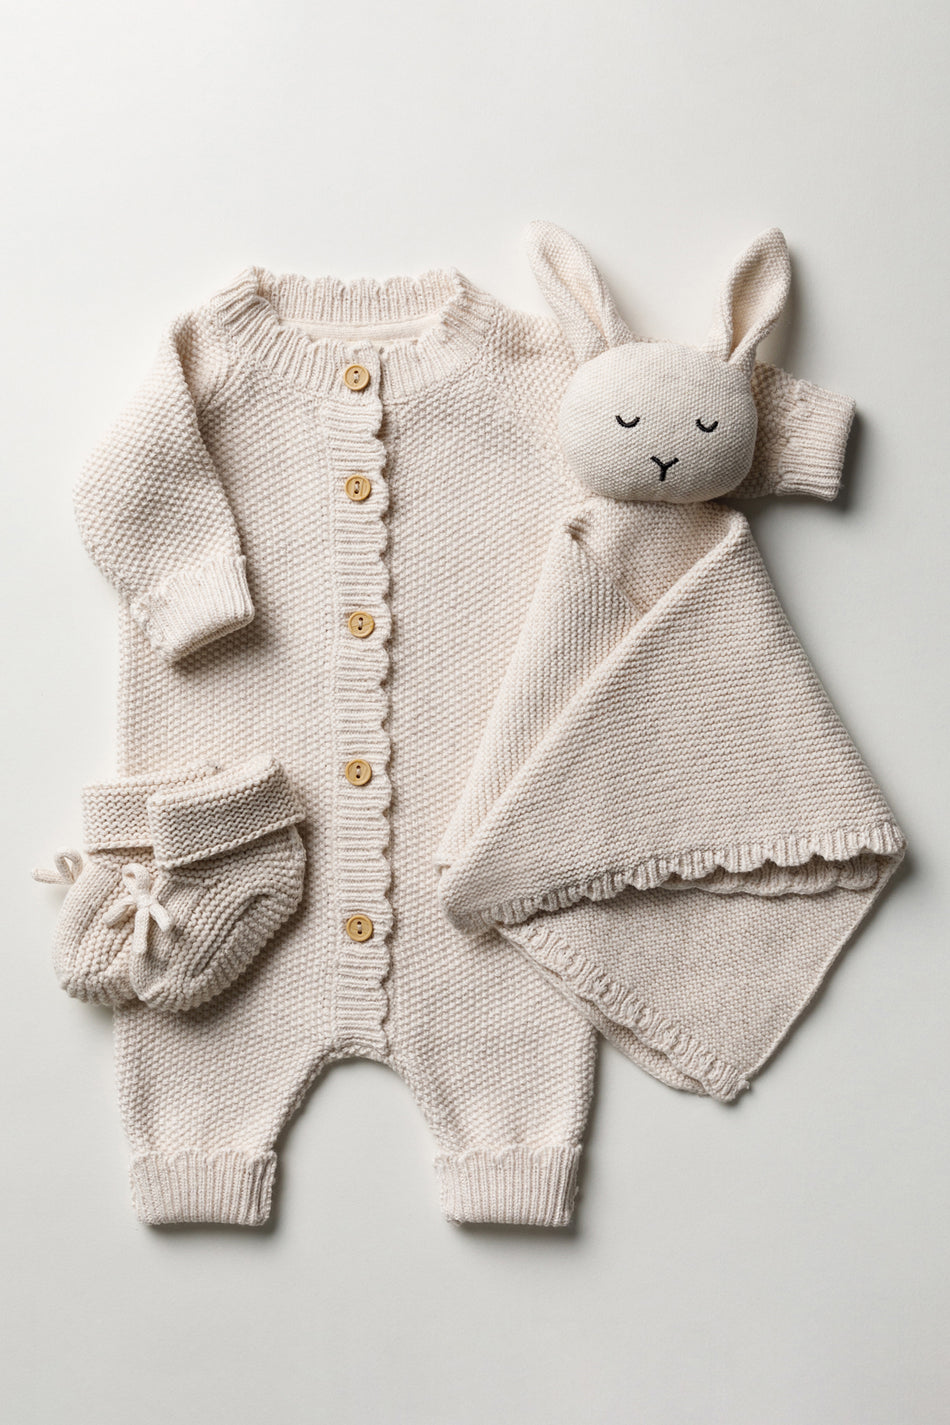 Isla & Fraser - Shop All: Our Award-Winning Organic Cotton Baby Knits